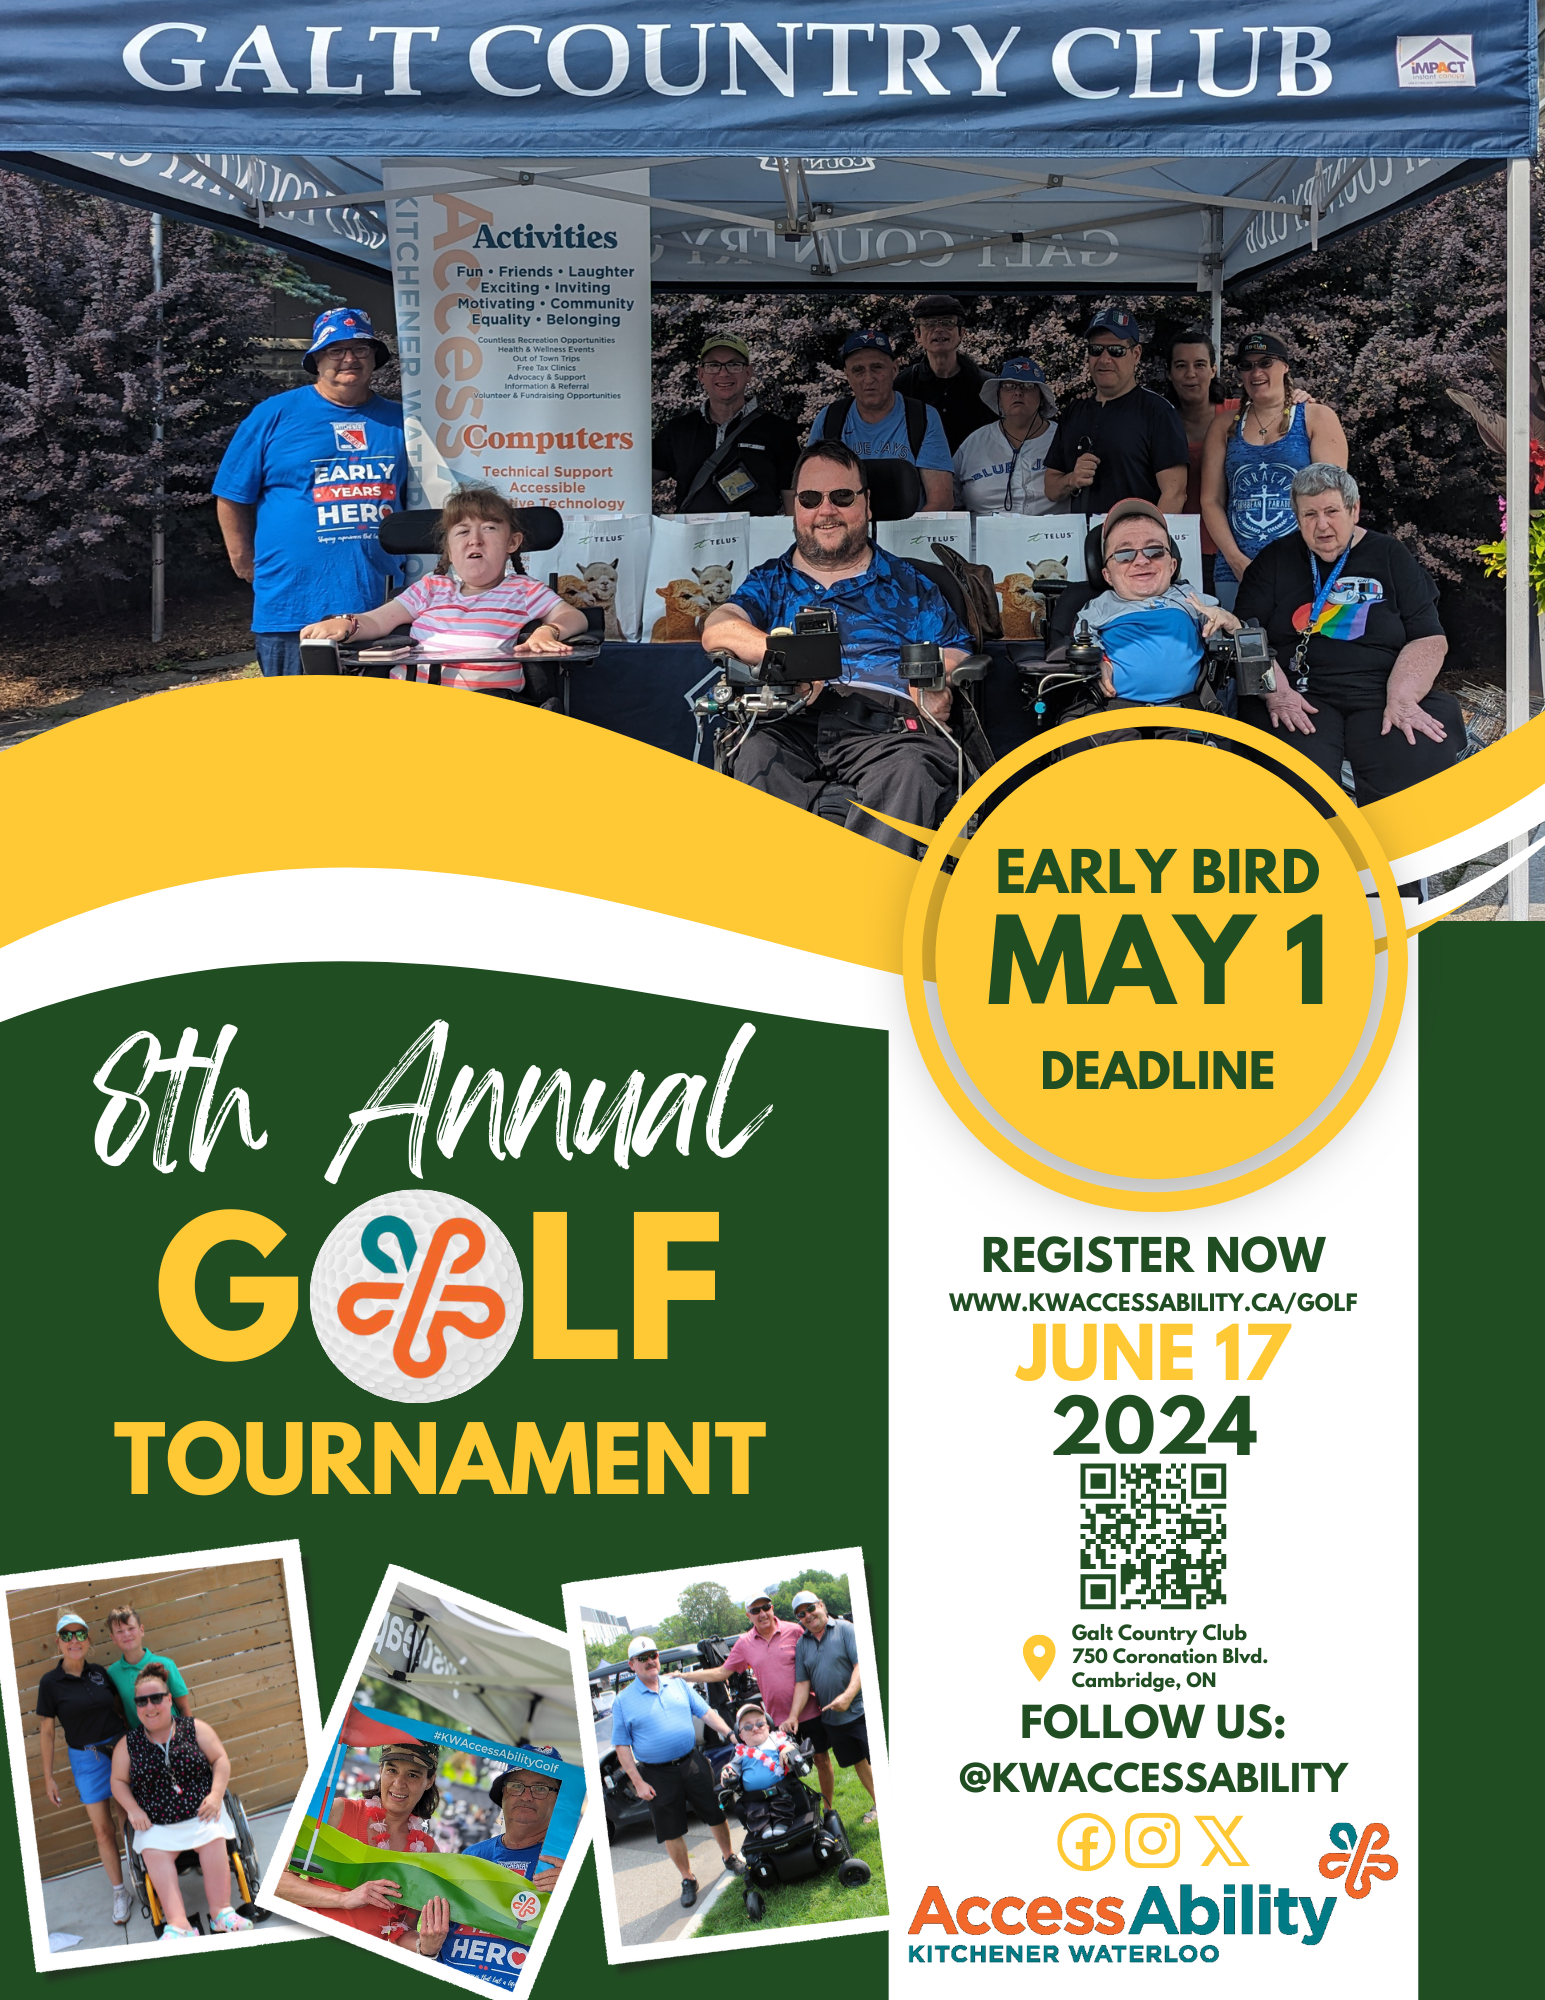 Poster with info about KW AccessAbility Golf Tournament Monday June 17, 2024 at Galt Country Club. Click Photo to be taken to Eventbrite Registration Page.